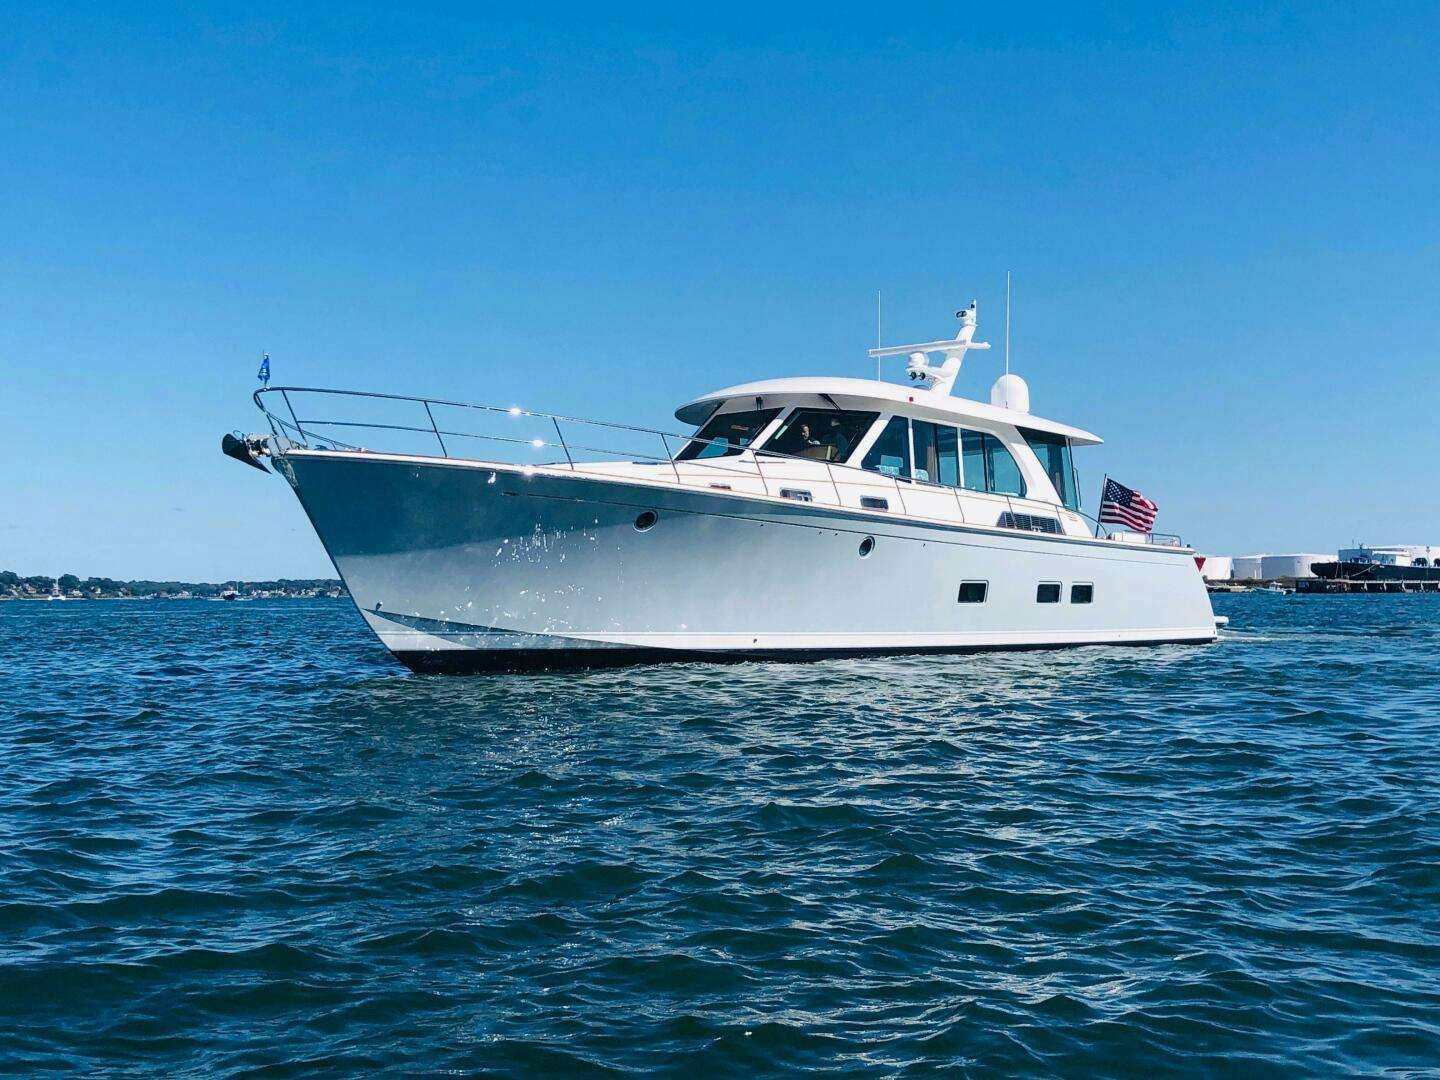 Whirl away
Yacht for Sale